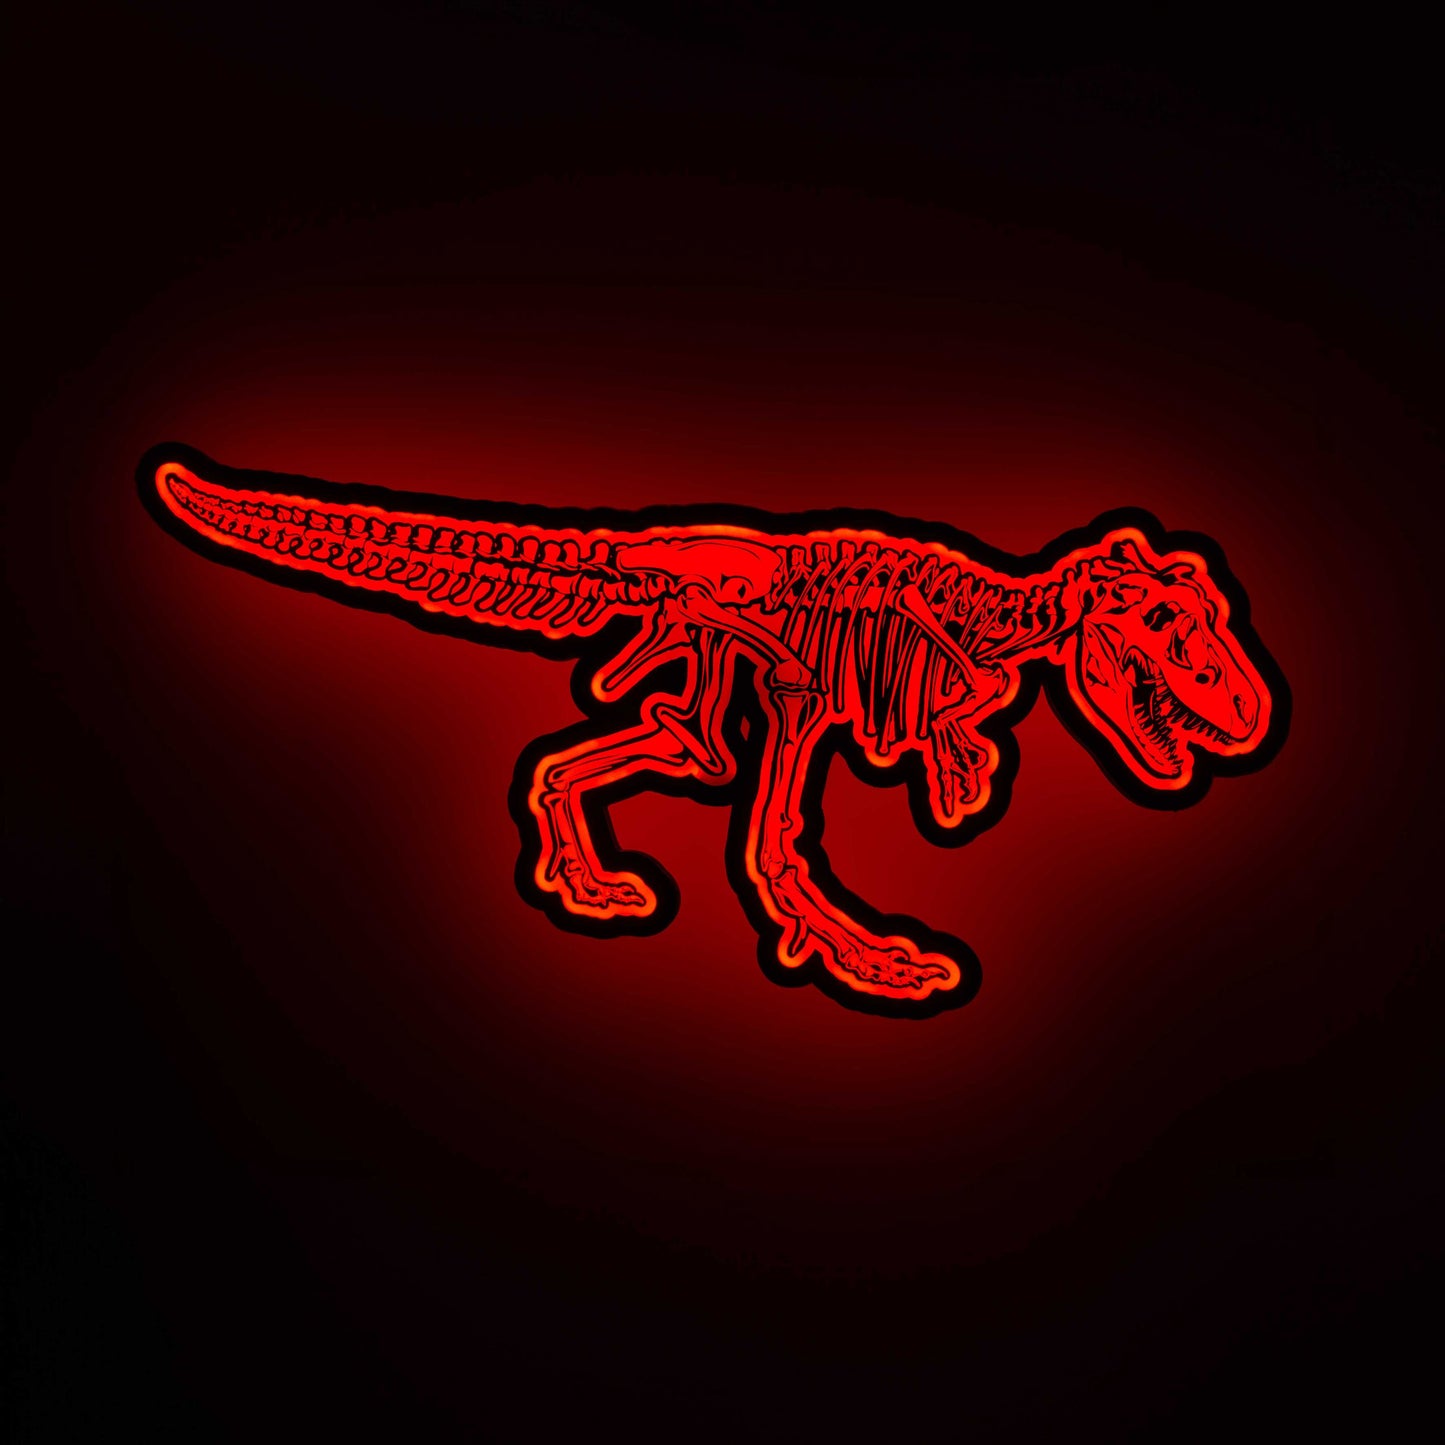 image of a 3d wall mounted acrylic light, backlit by red led lights, featuring an epic dinosaur themed illustration of a t-rex skeleton.